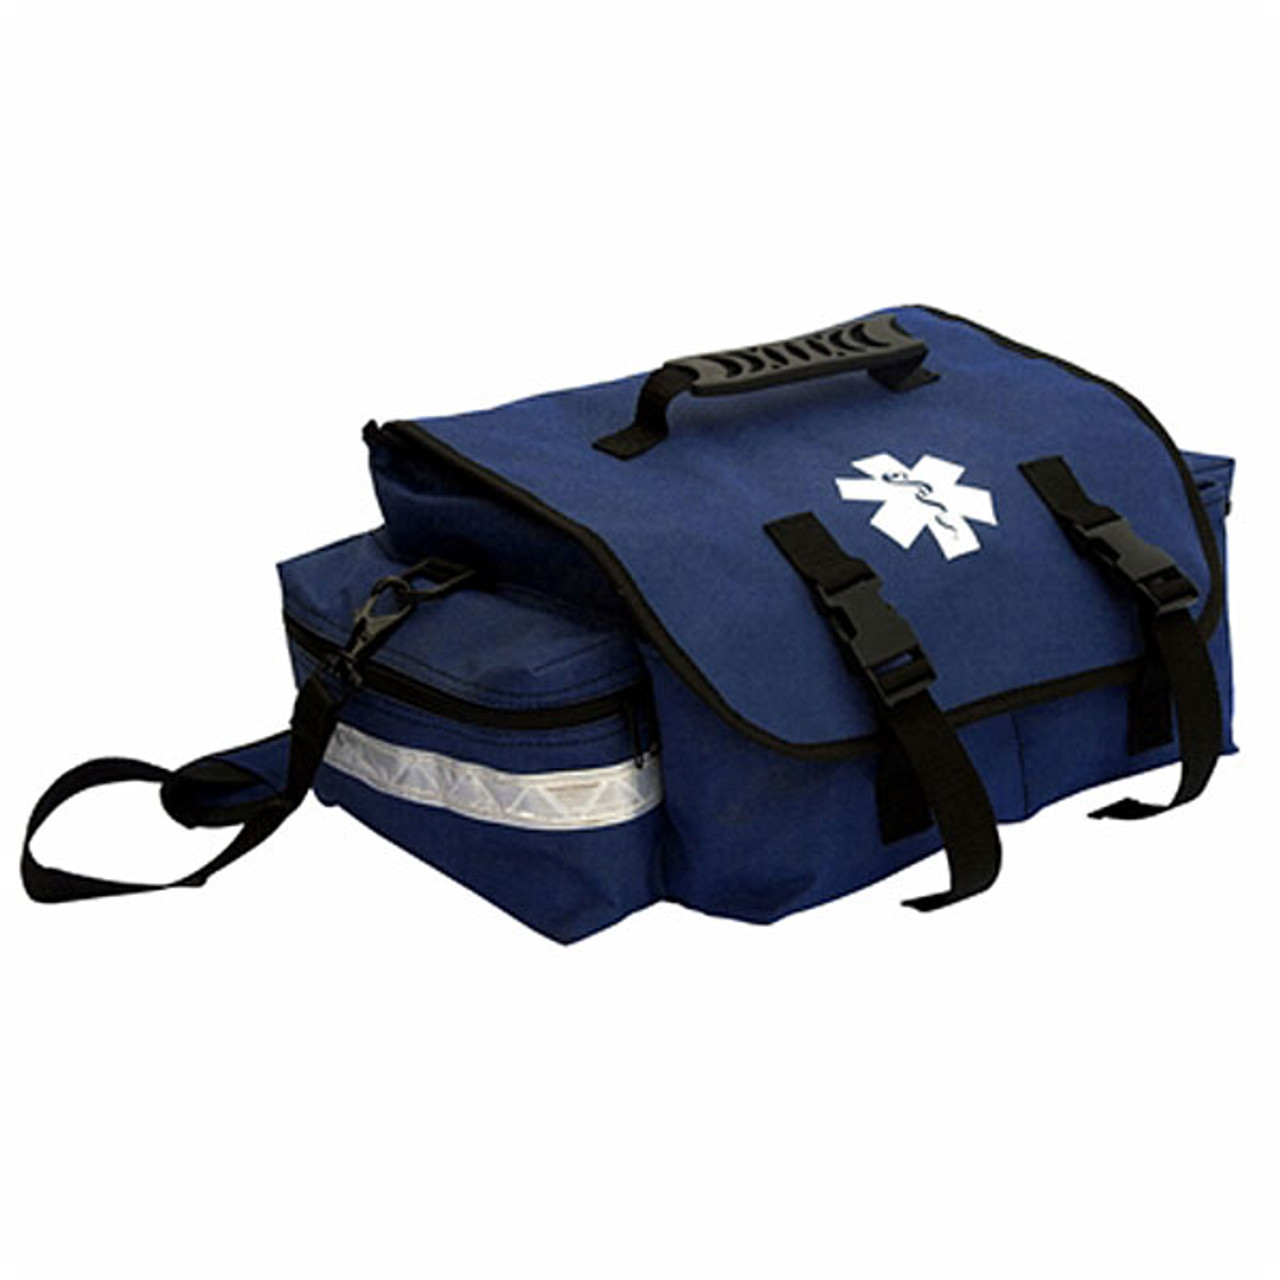 EMT First Responder Medical Bag - Navy Blue - 15" x 8" x 8" - EMT Bags,  Backpacks and First Aid Kit Containers